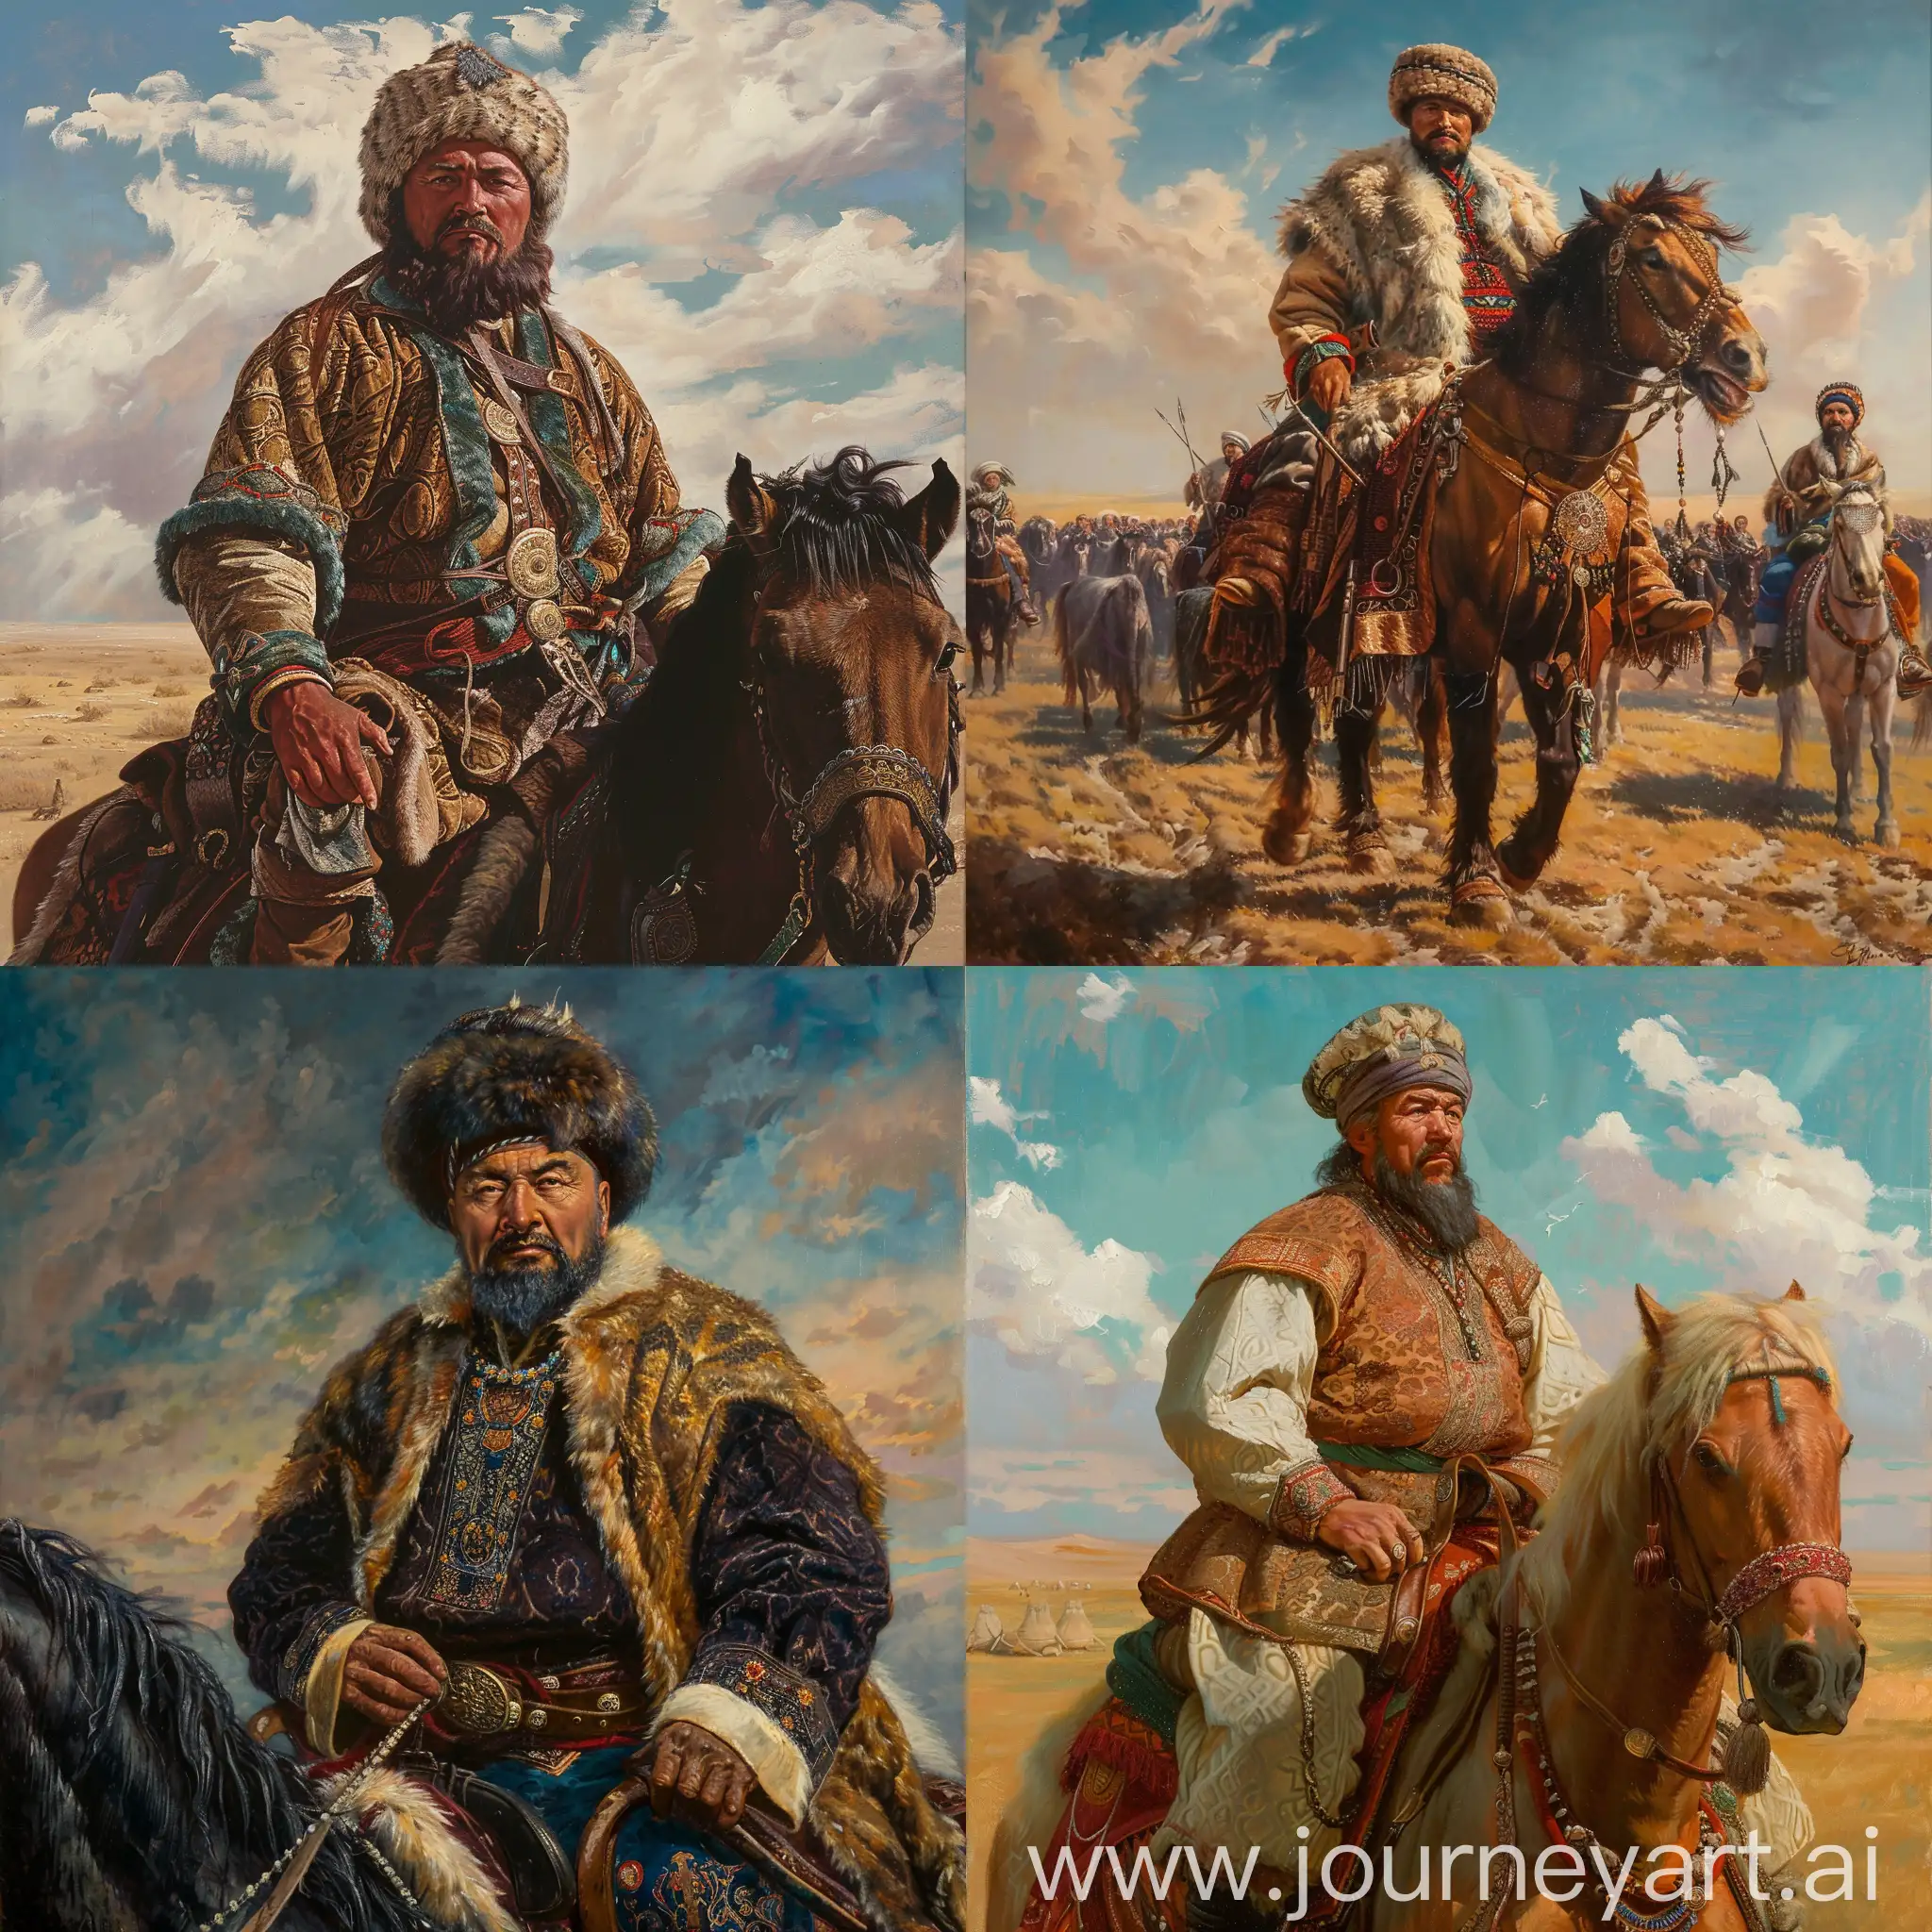 Kazakh khan strictly rules the steppes and nomads, oil painting, renaissance style